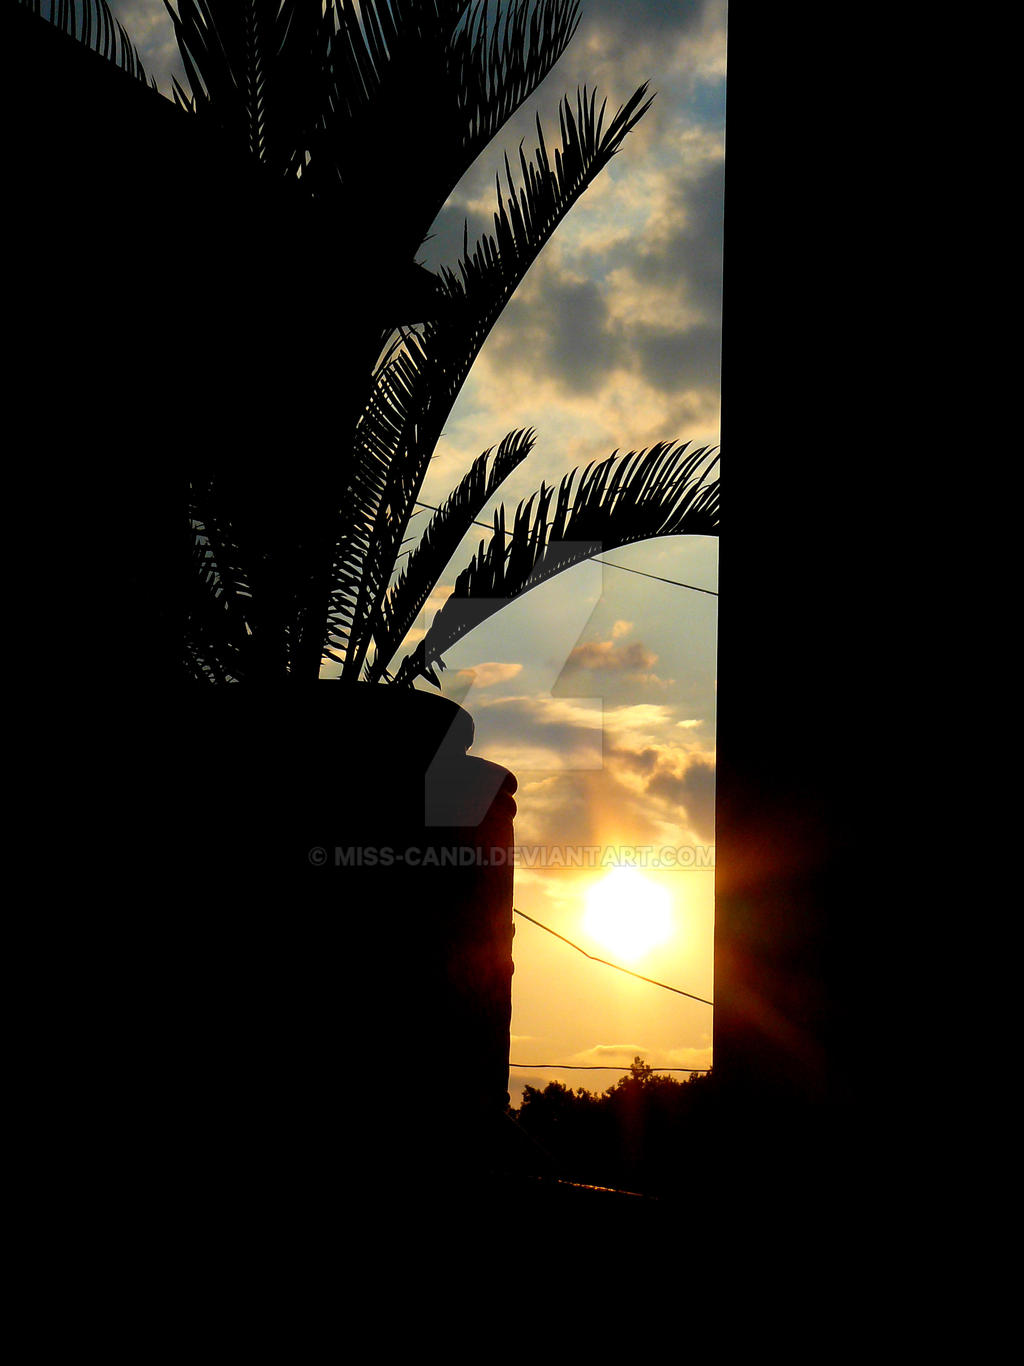 Cycas Sunset by miss-candi on DeviantArt